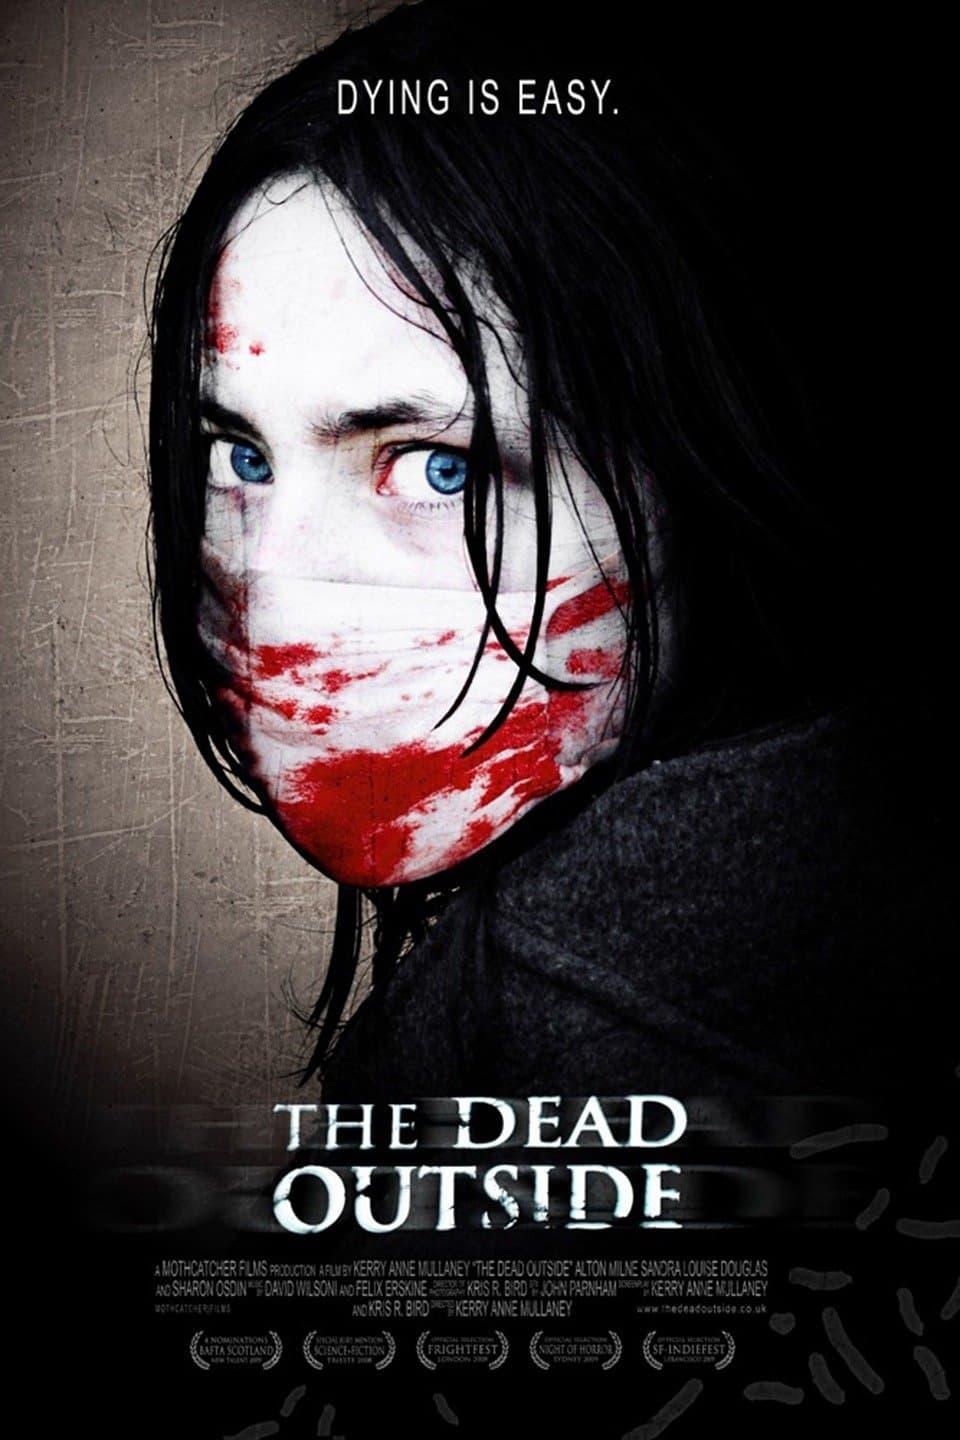 The Dead Outside poster